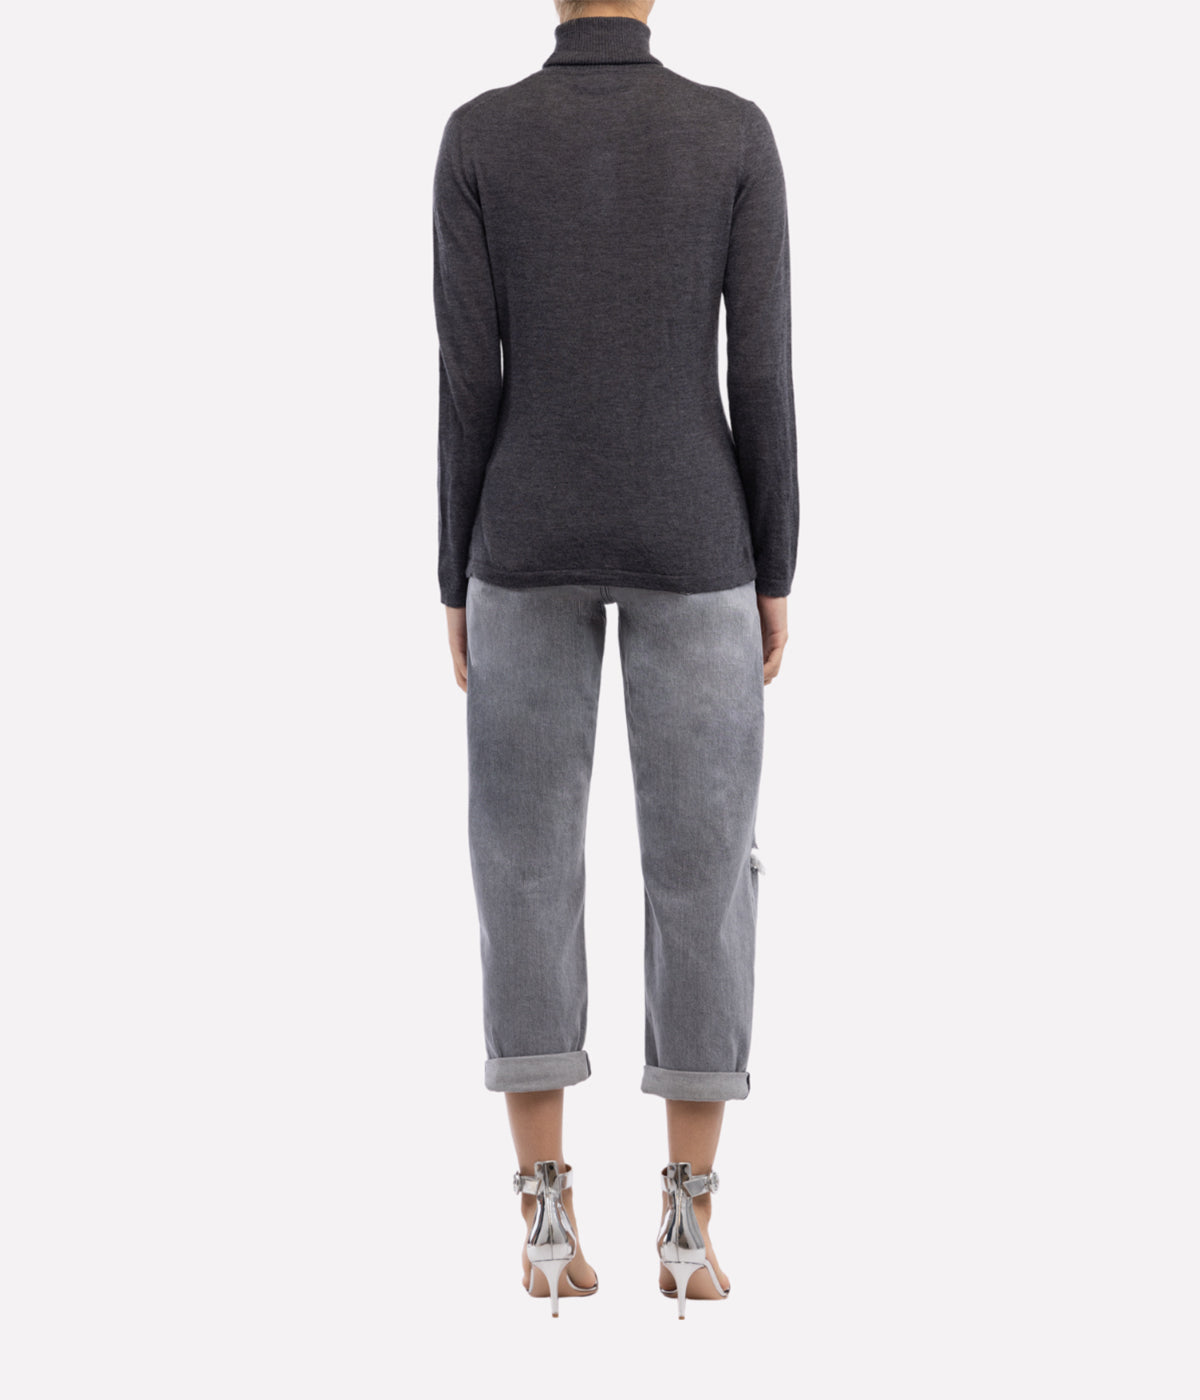 Baby Cashmere Turtleneck in Charcoal